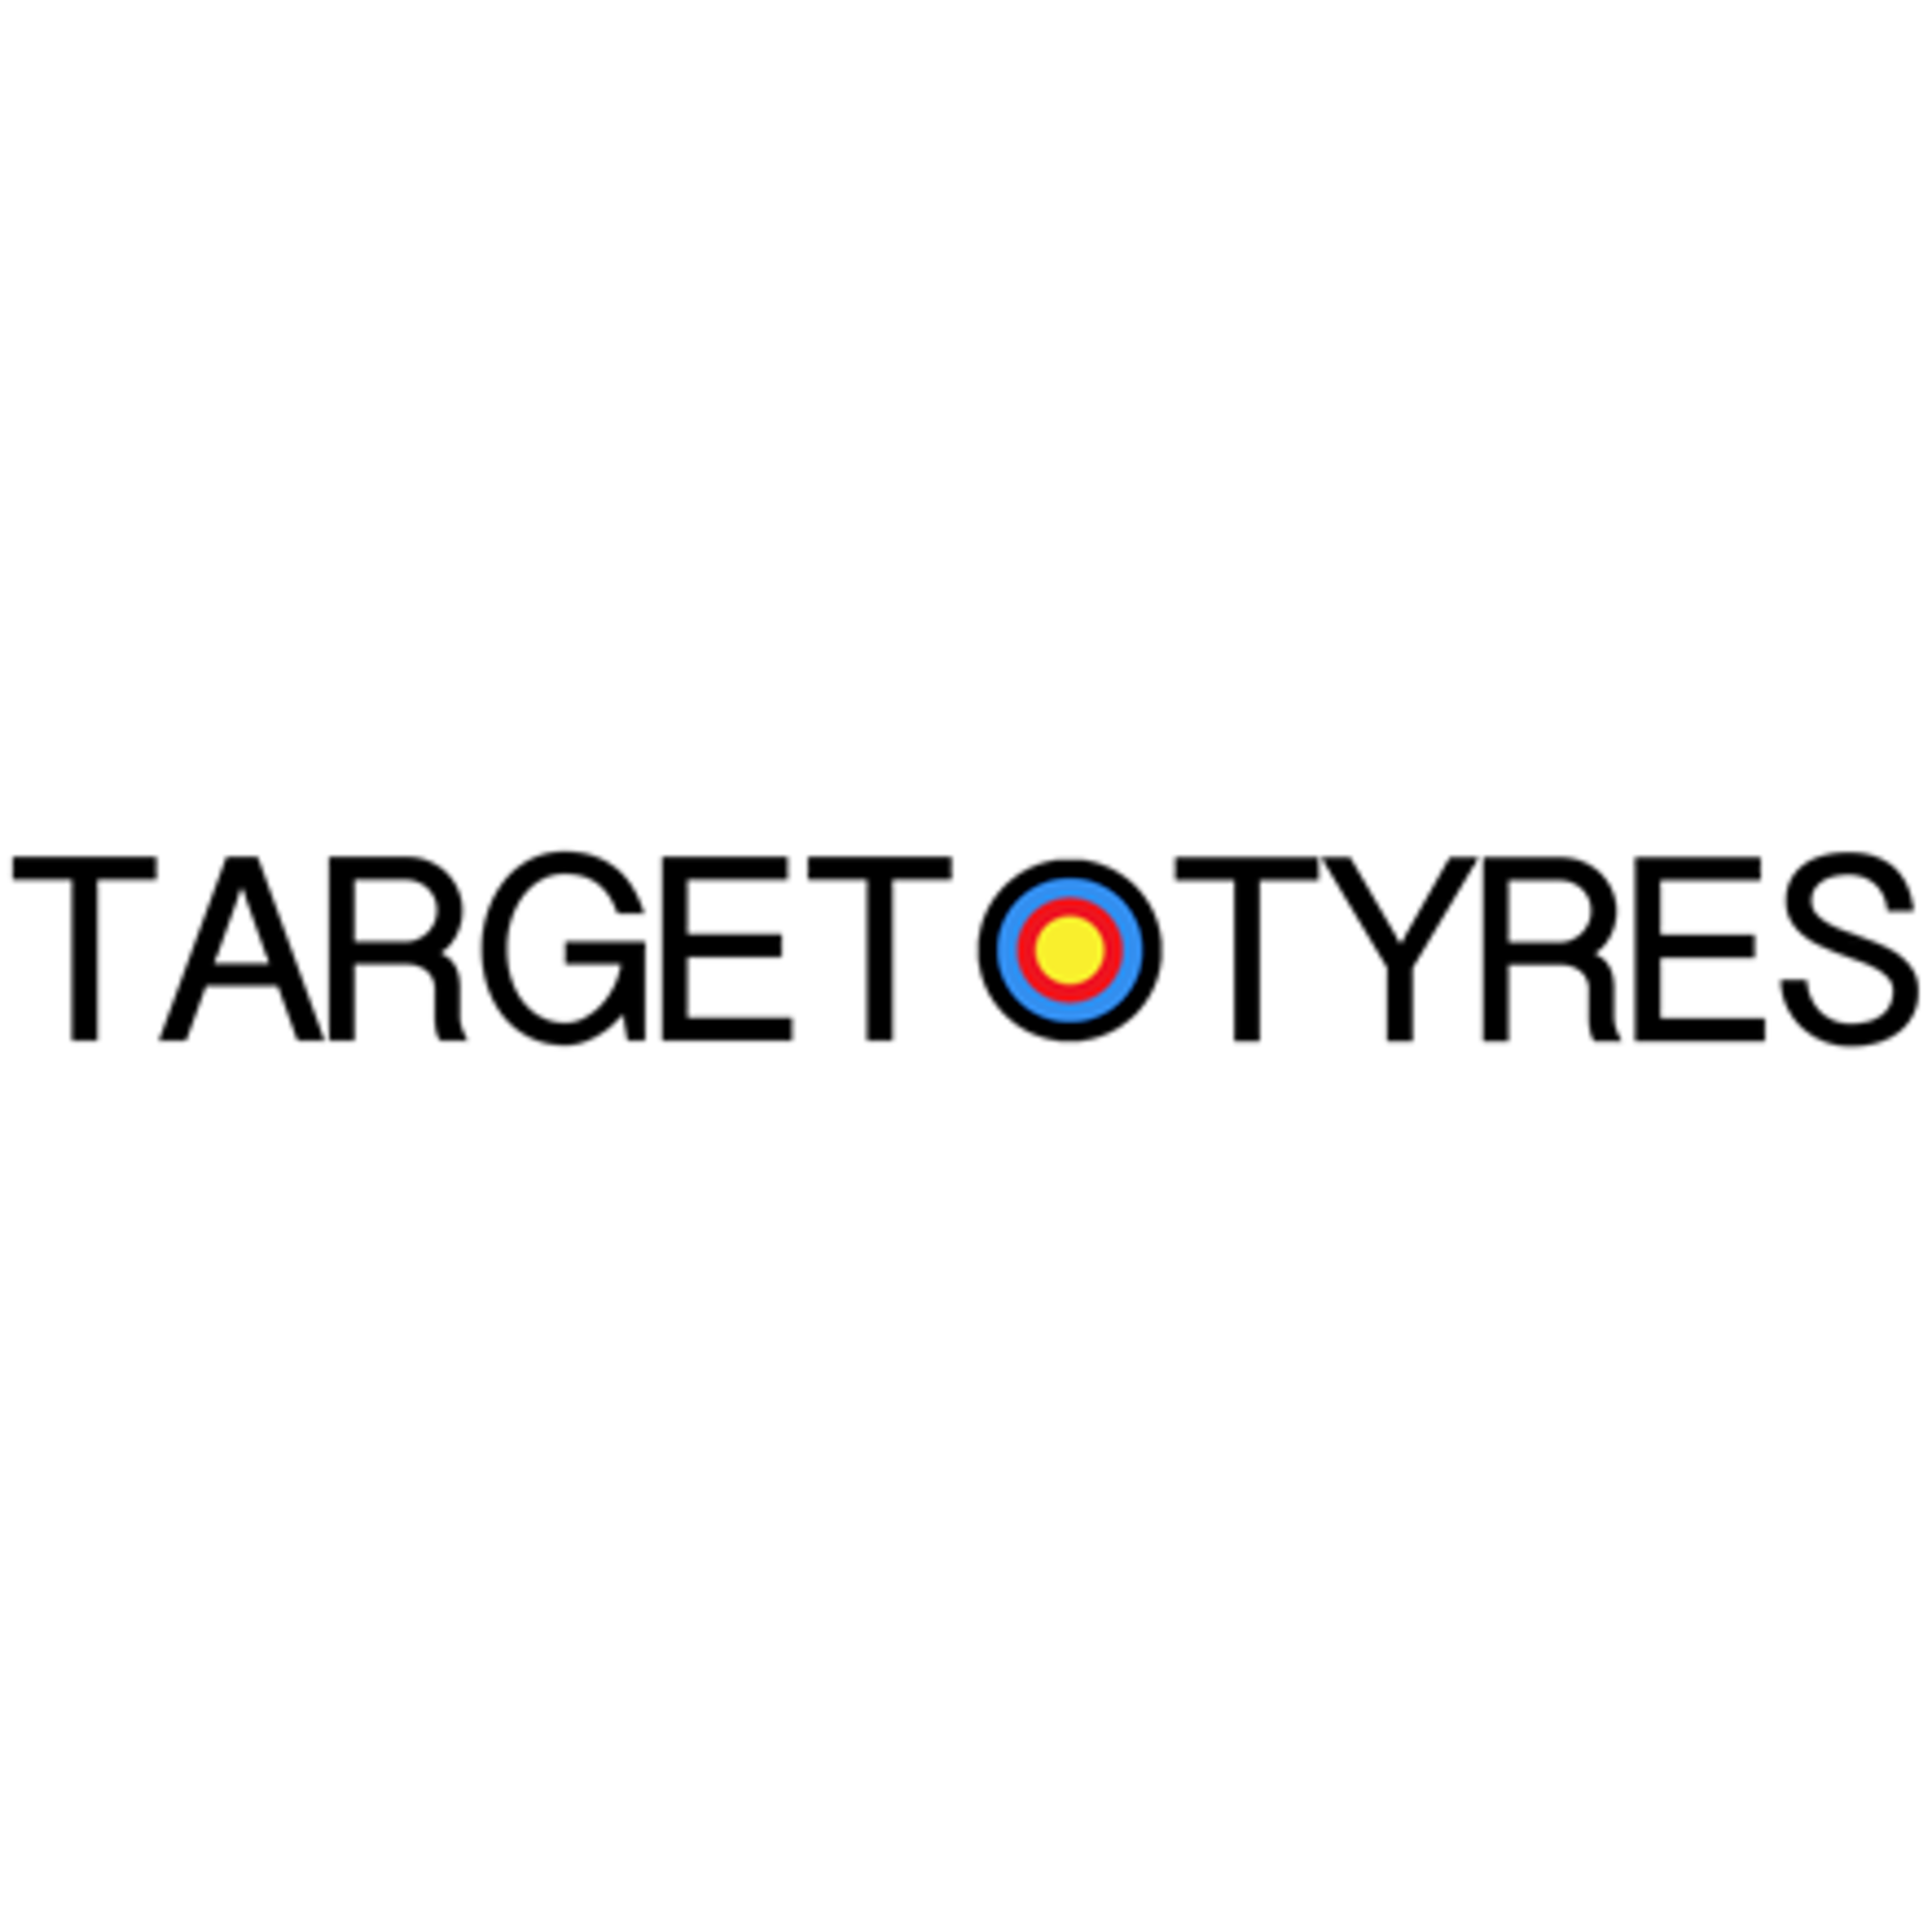 Target Tyres (Blairgowrie) - Blairgowrie, Perthshire PH10 6ER - 01250 873113 | ShowMeLocal.com